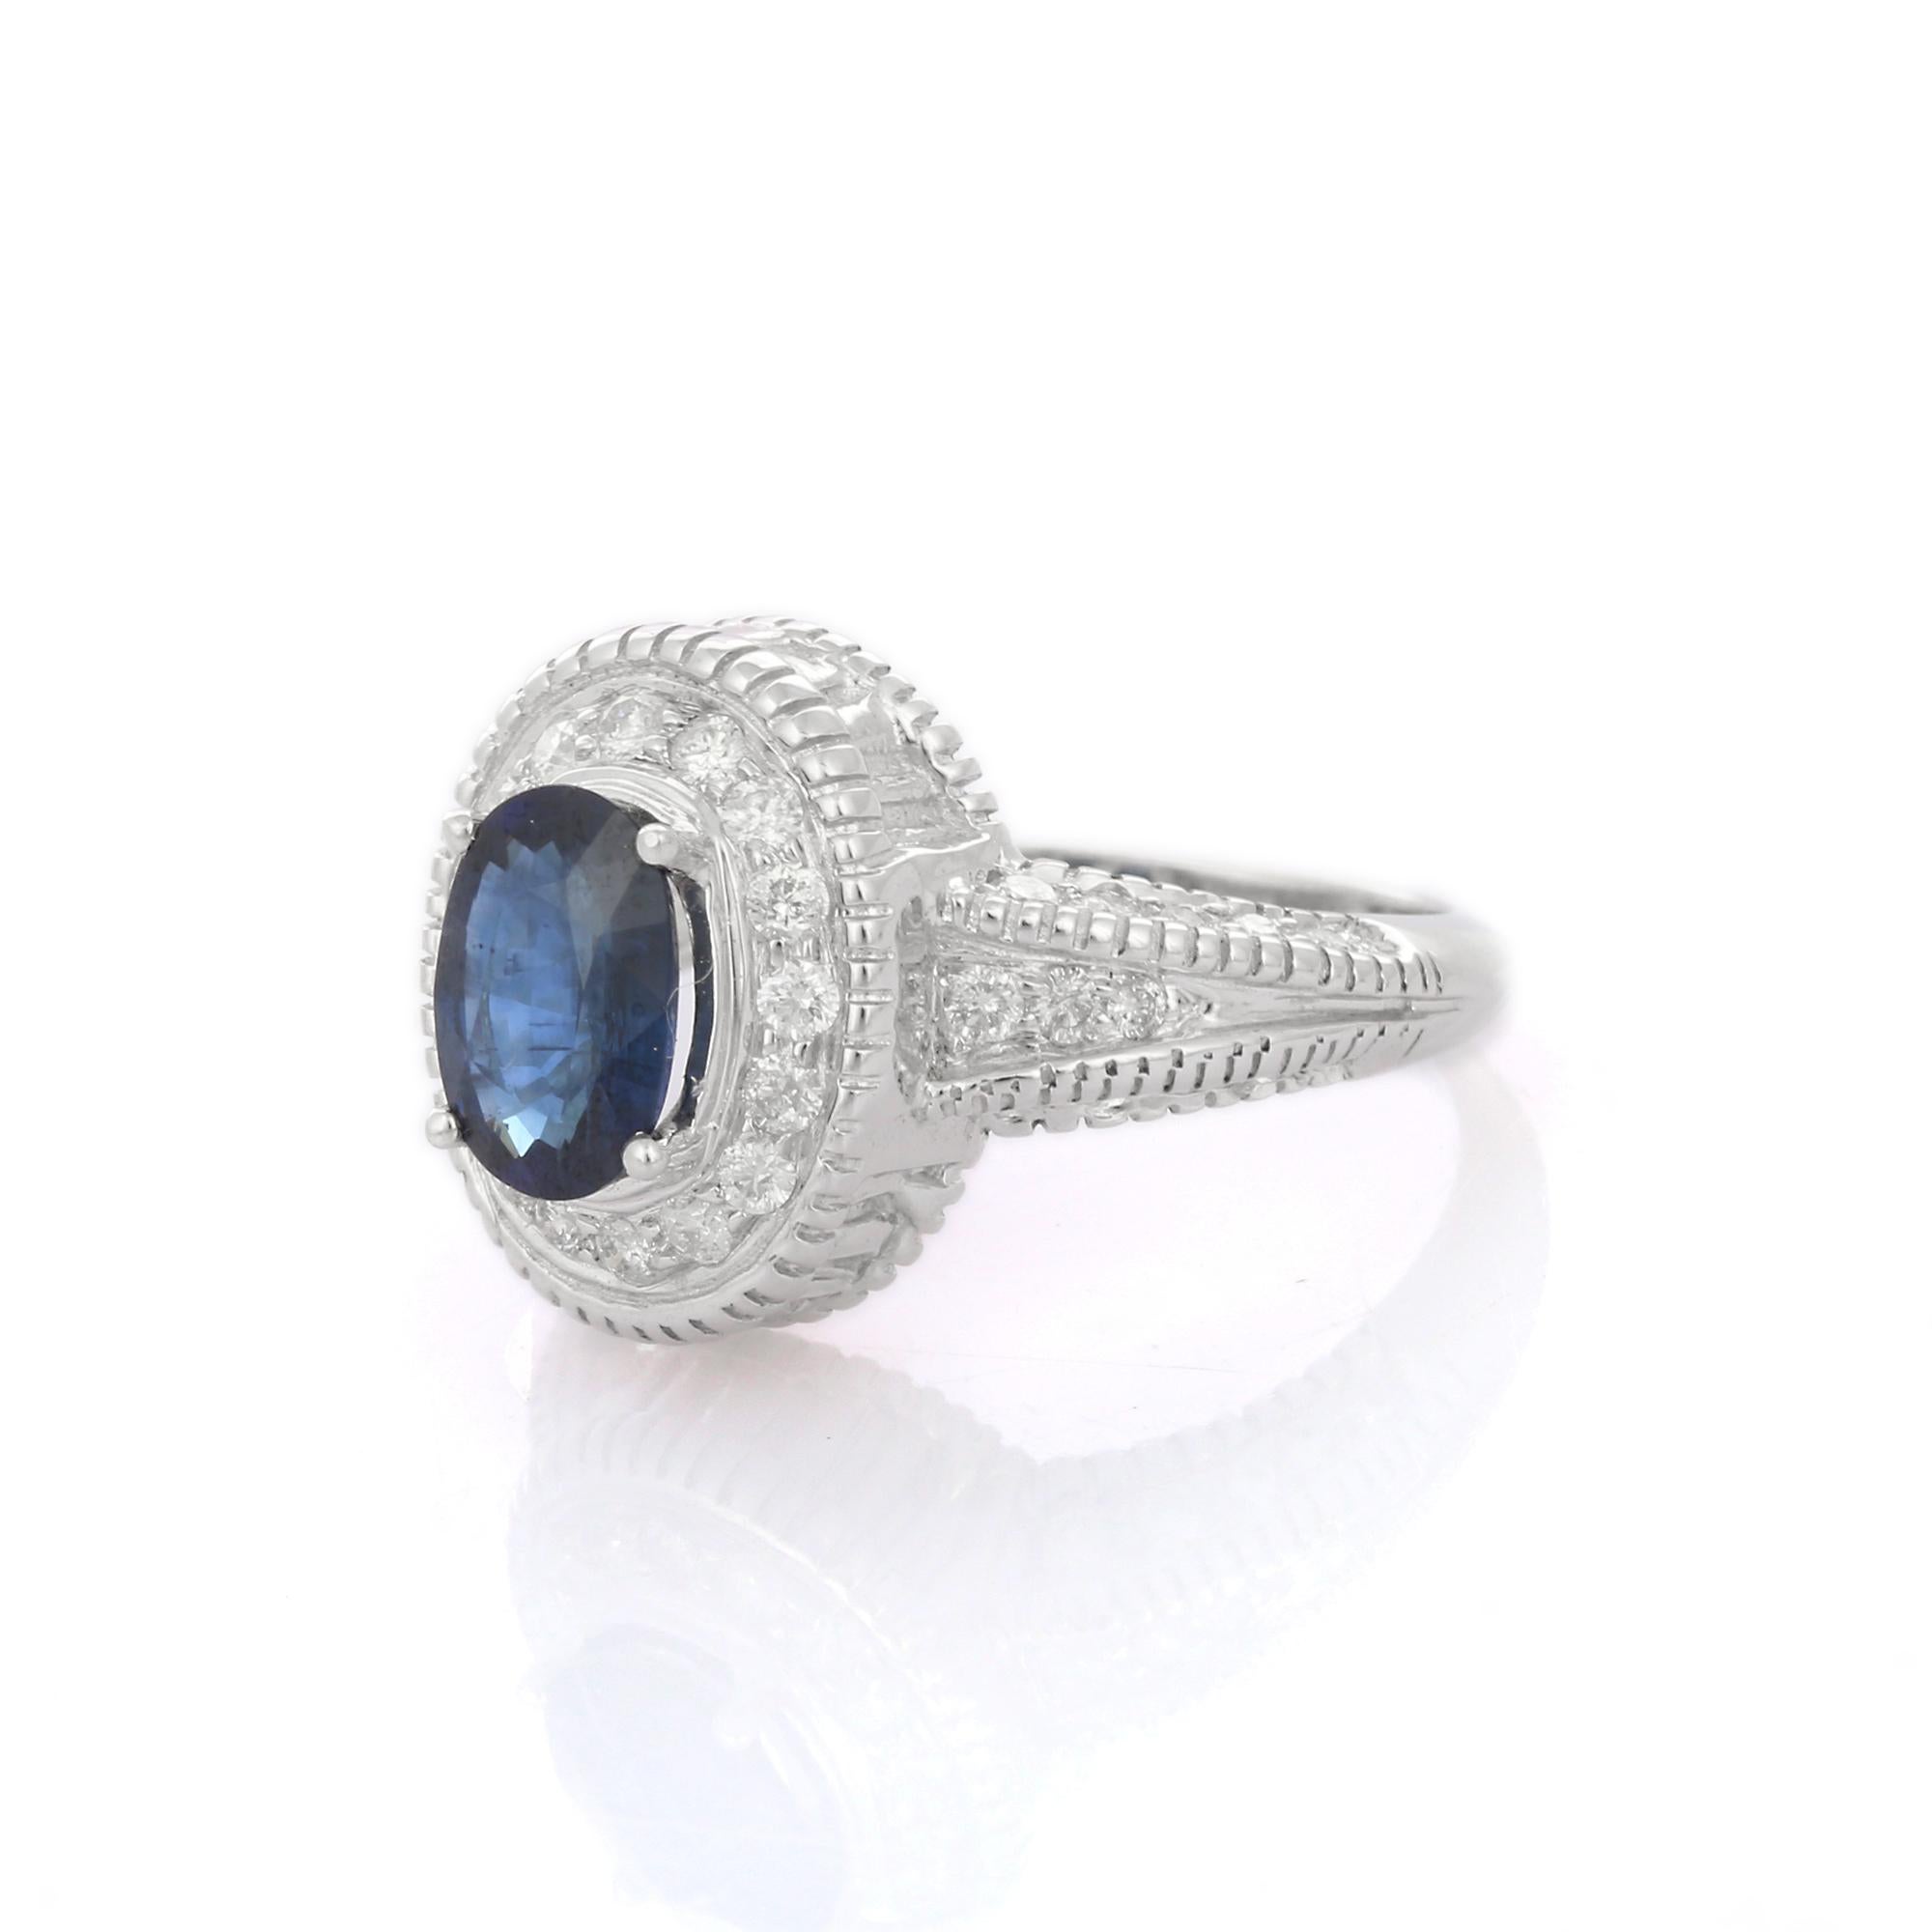 For Sale:  Blue Sapphire Amid Diamonds in 18K Solid White Gold Wedding Ring 3